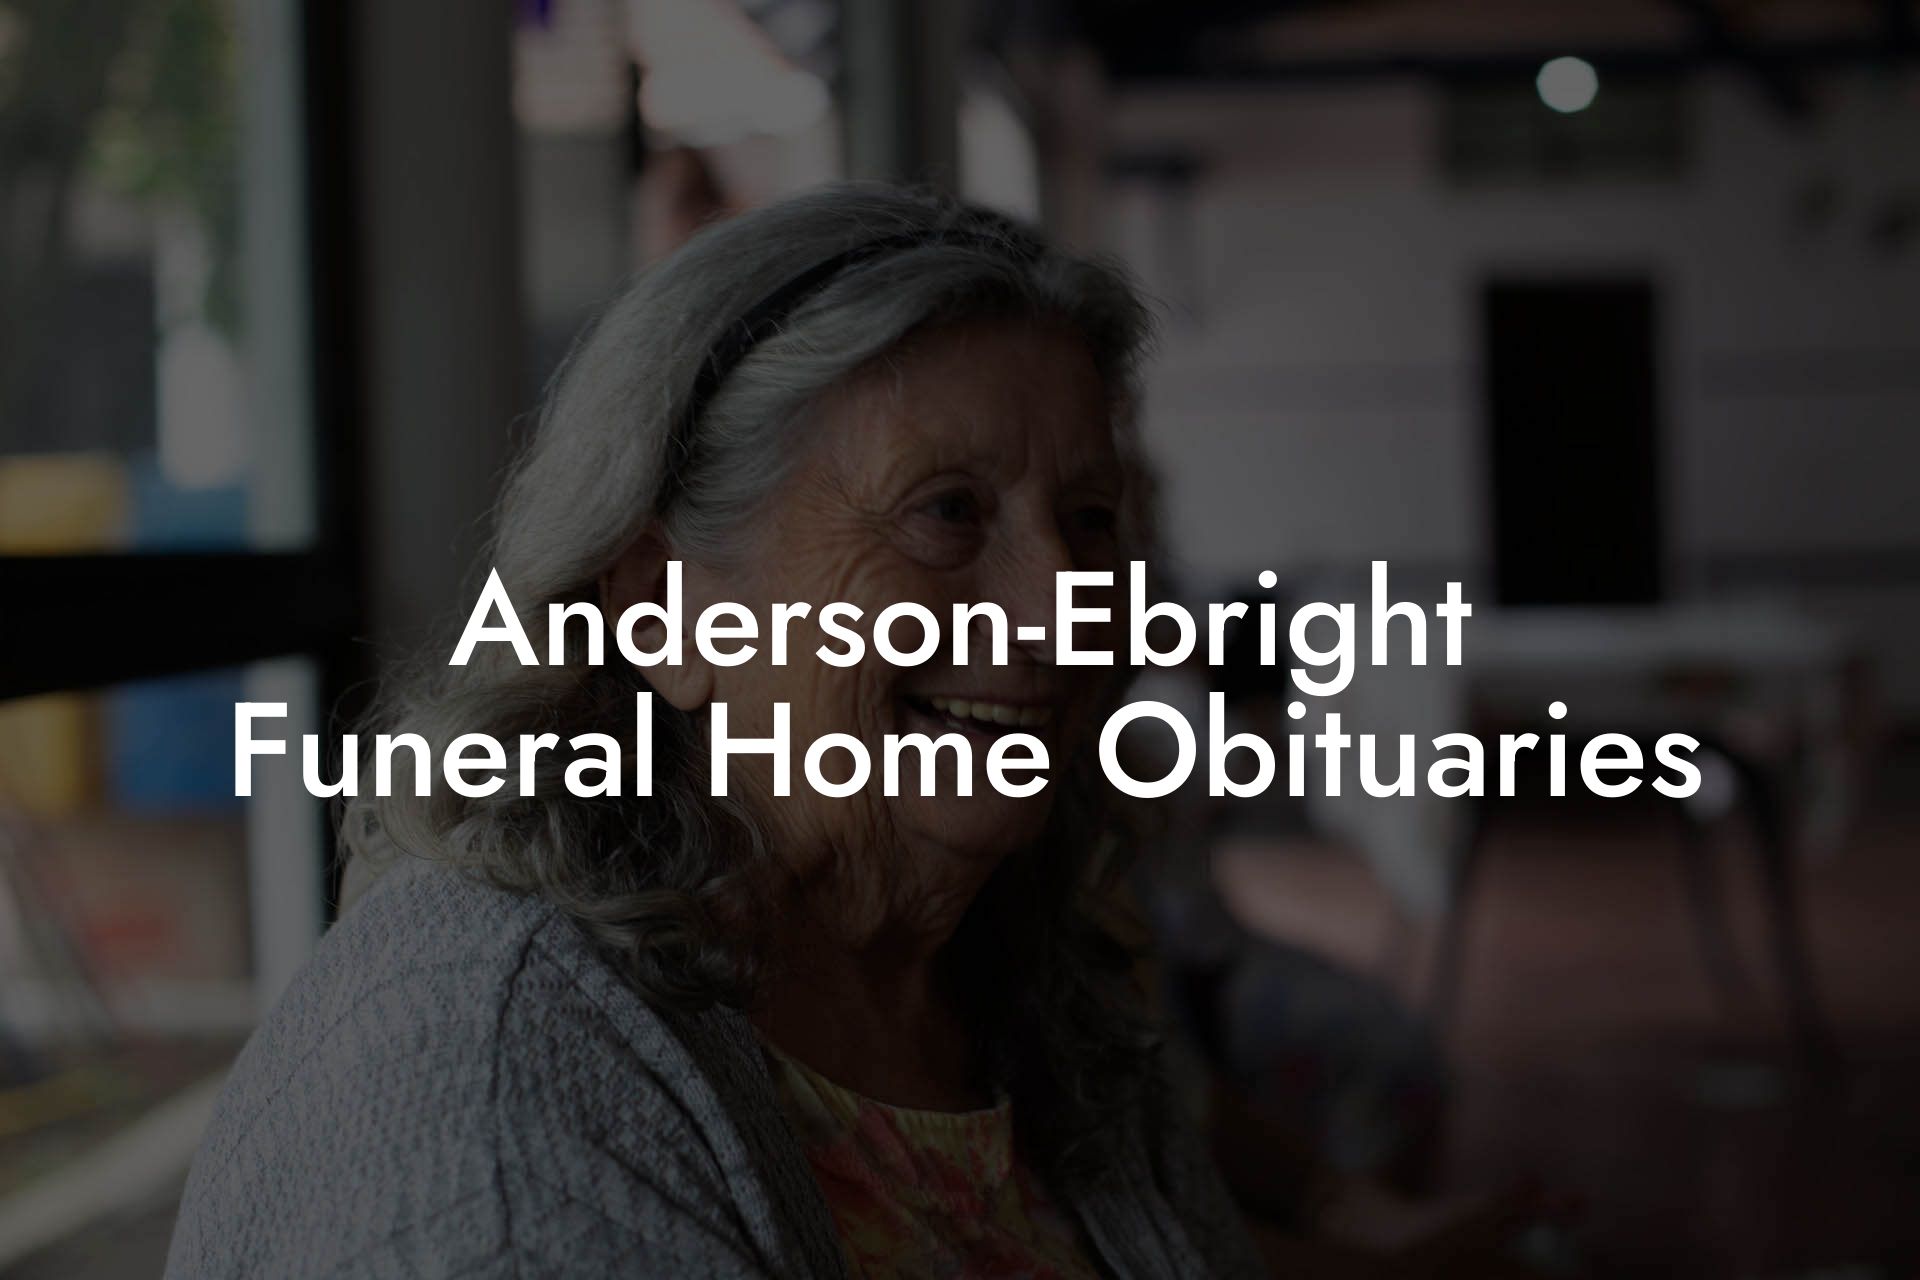 Anderson-Ebright Funeral Home Obituaries